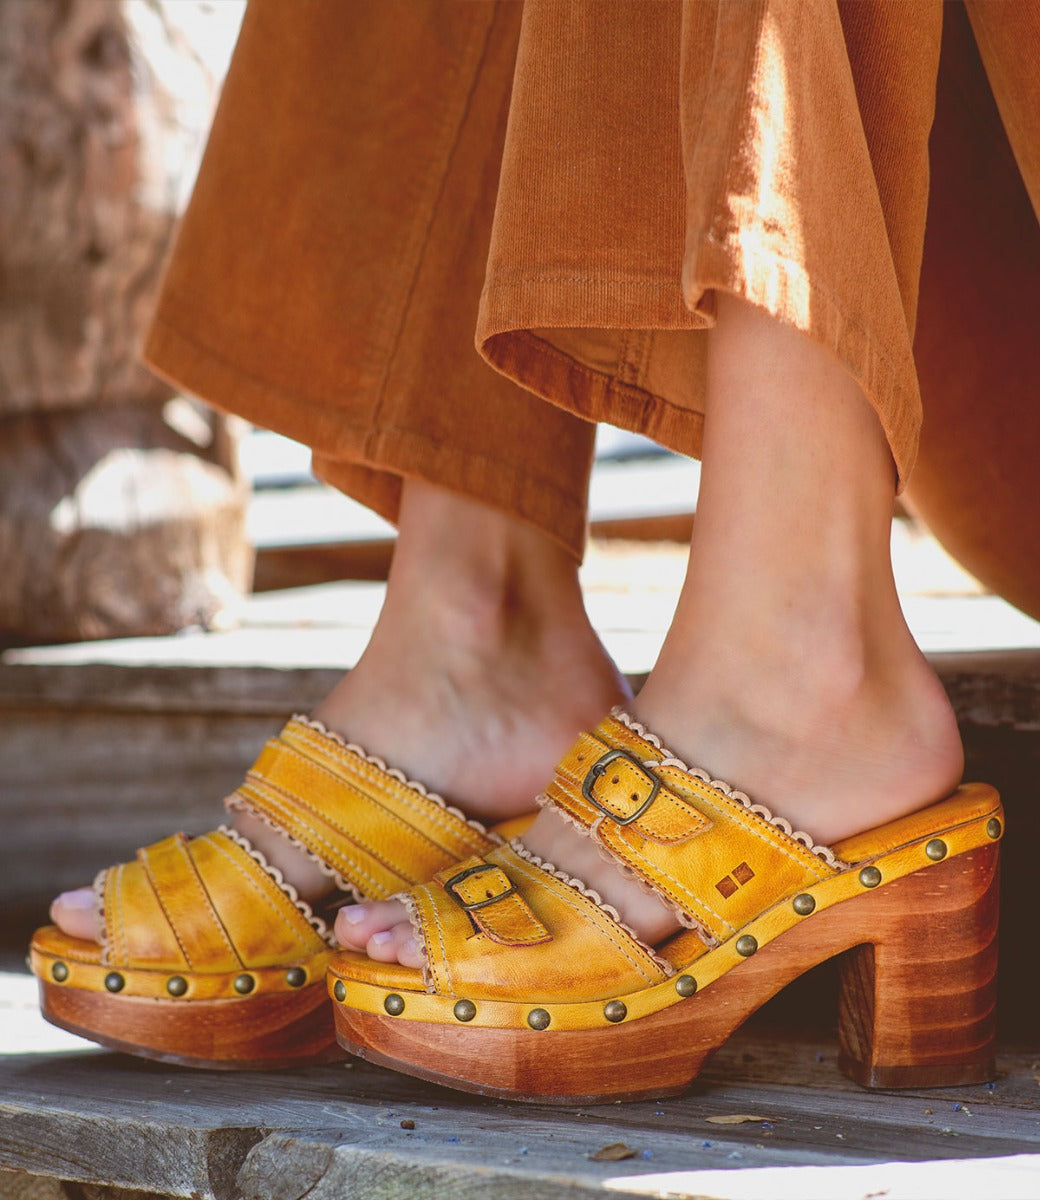 A woman wearing yellow Bed Stu sandals on a wooden deck.